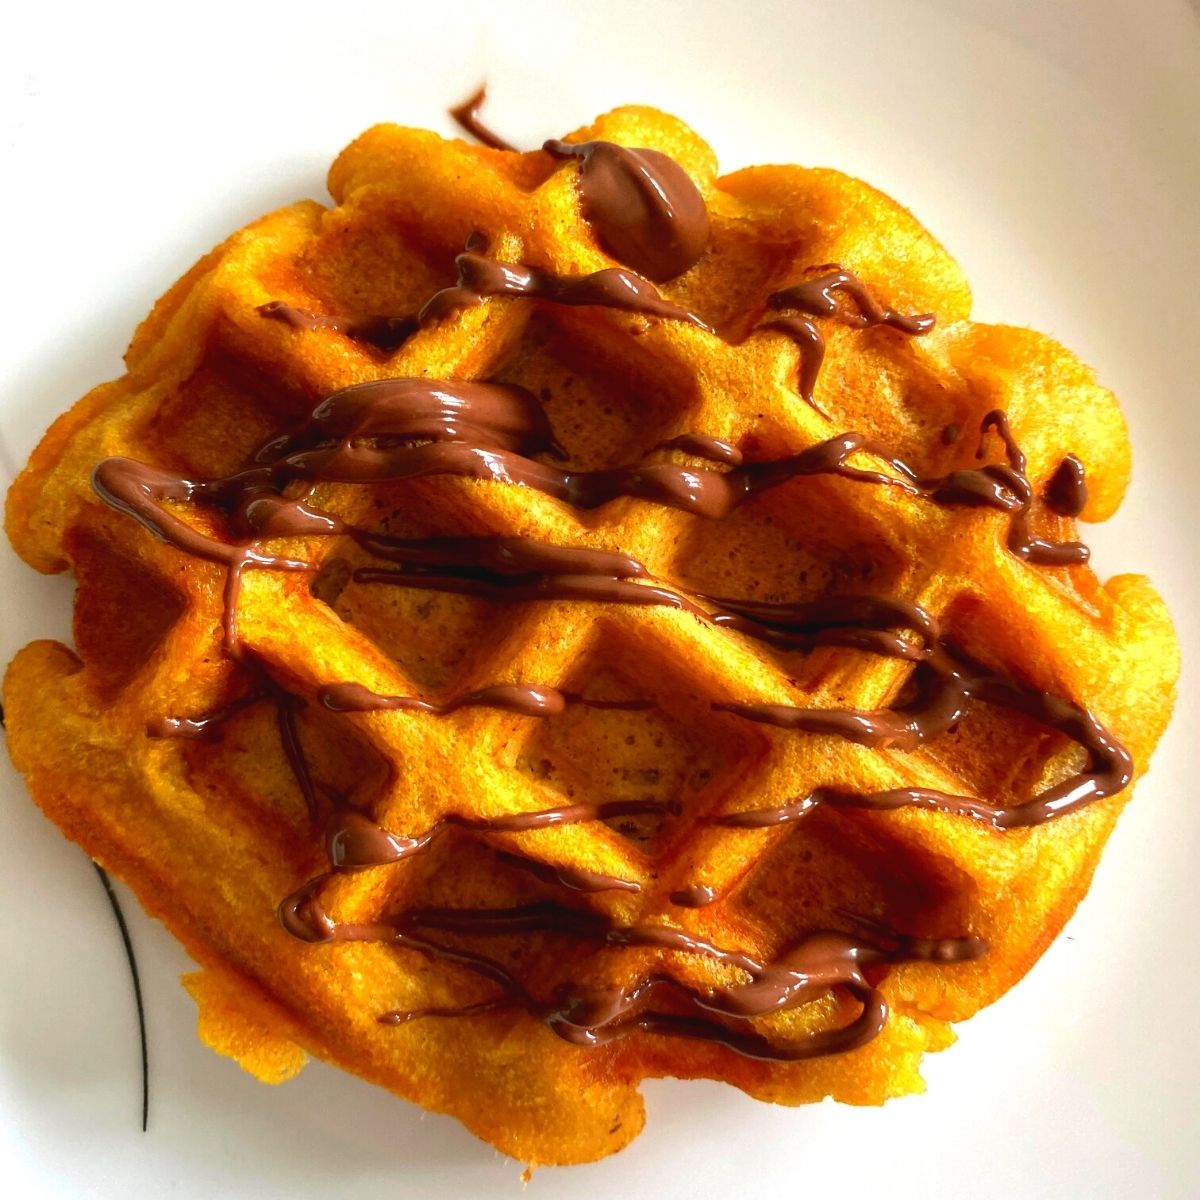 Whole Wheat Pumpkin Waffles are an easy fuss-free recipe, with the goodness of pumpkin, are crunchy on the outside and soft inside.